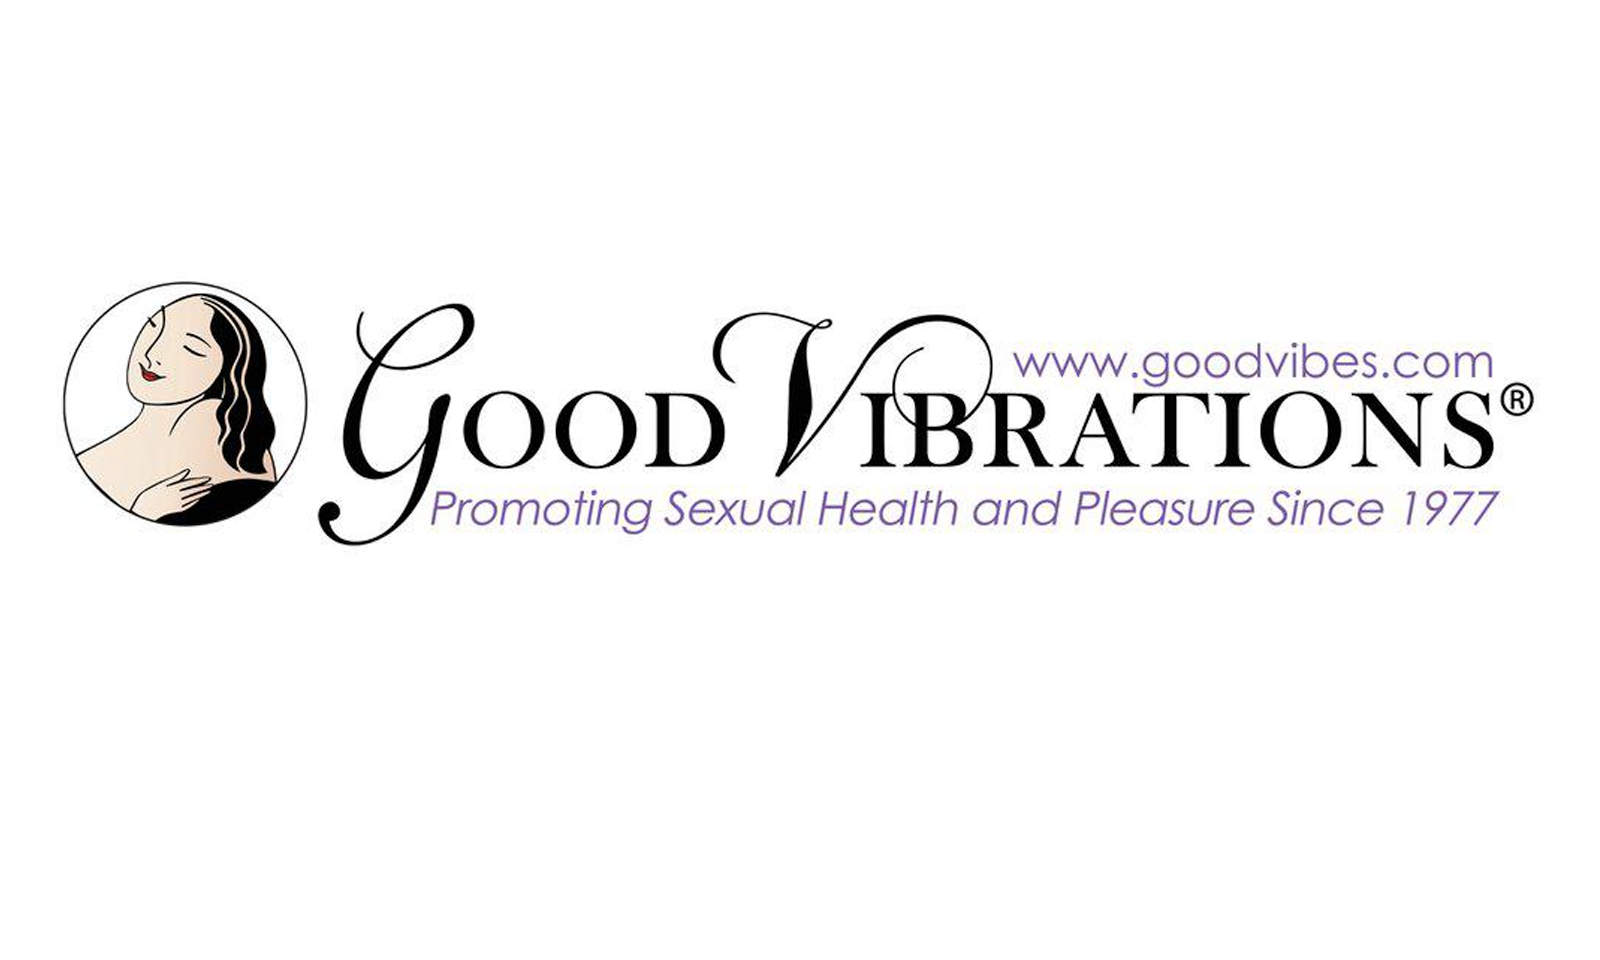 Newest GiVe Partners Announced by Good Vibrations